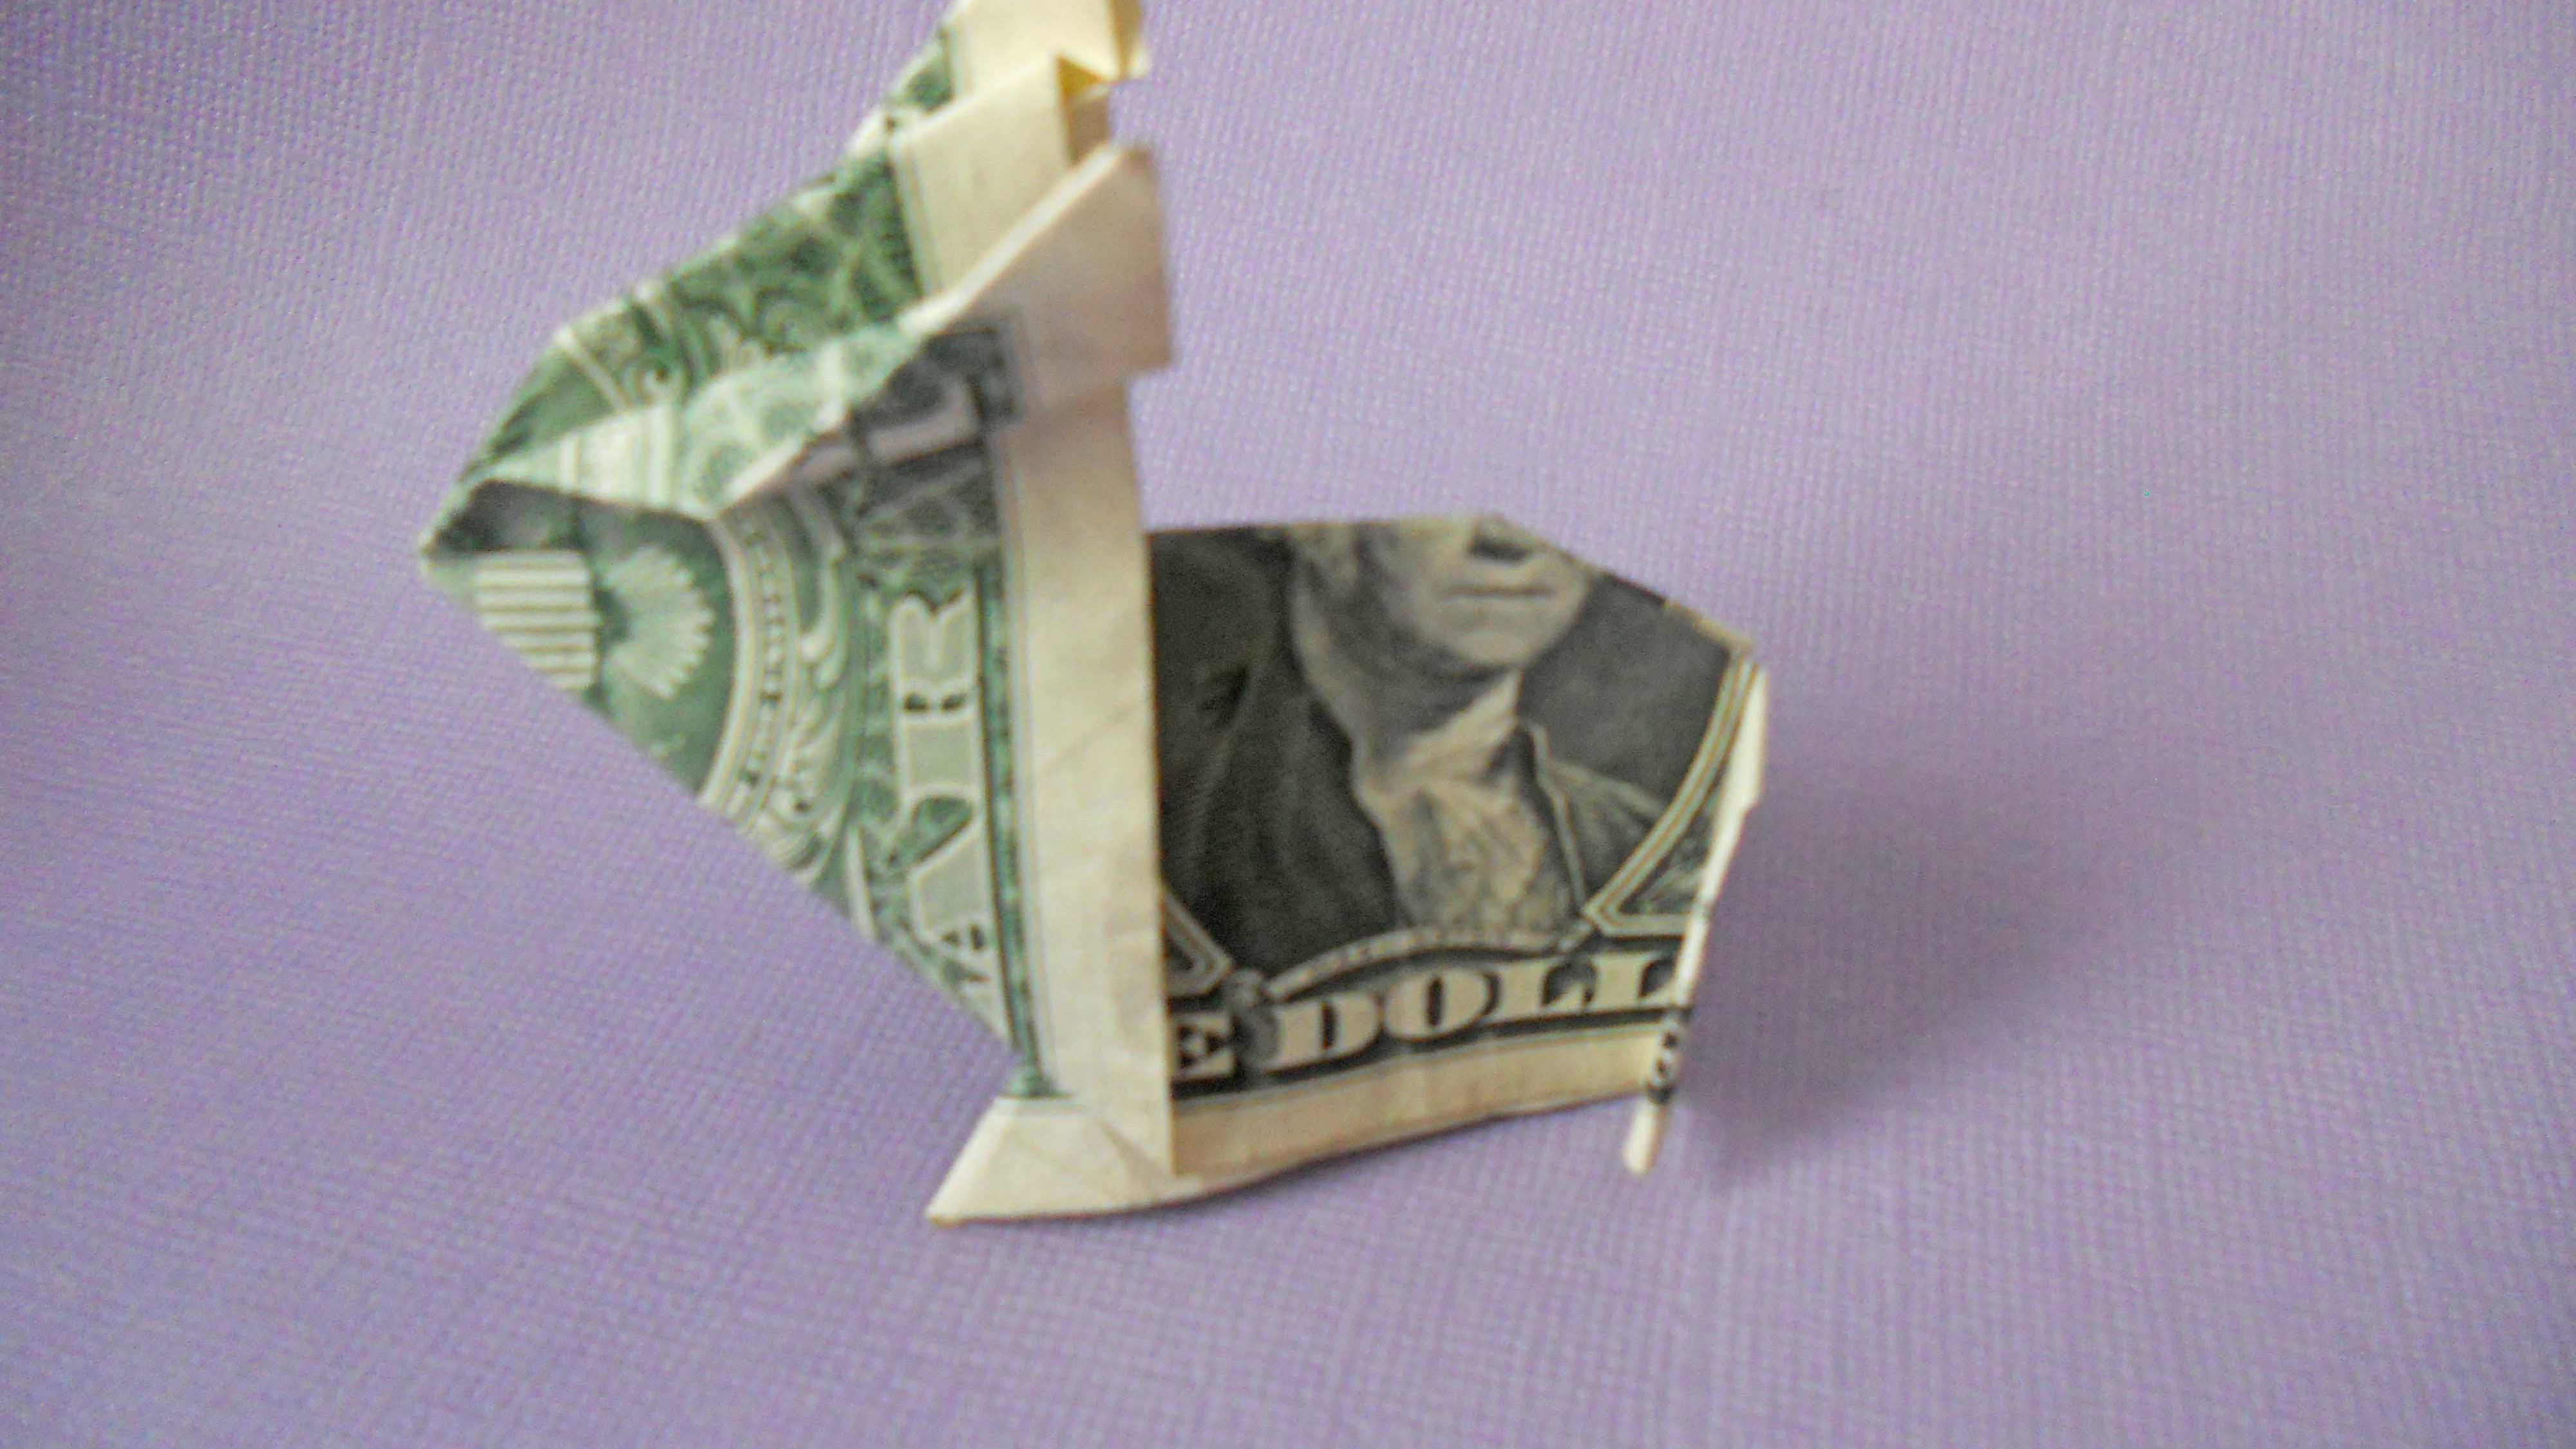 Ten Pound Note Origami How To Make A Crafty Origami Bunny Out Of Cash